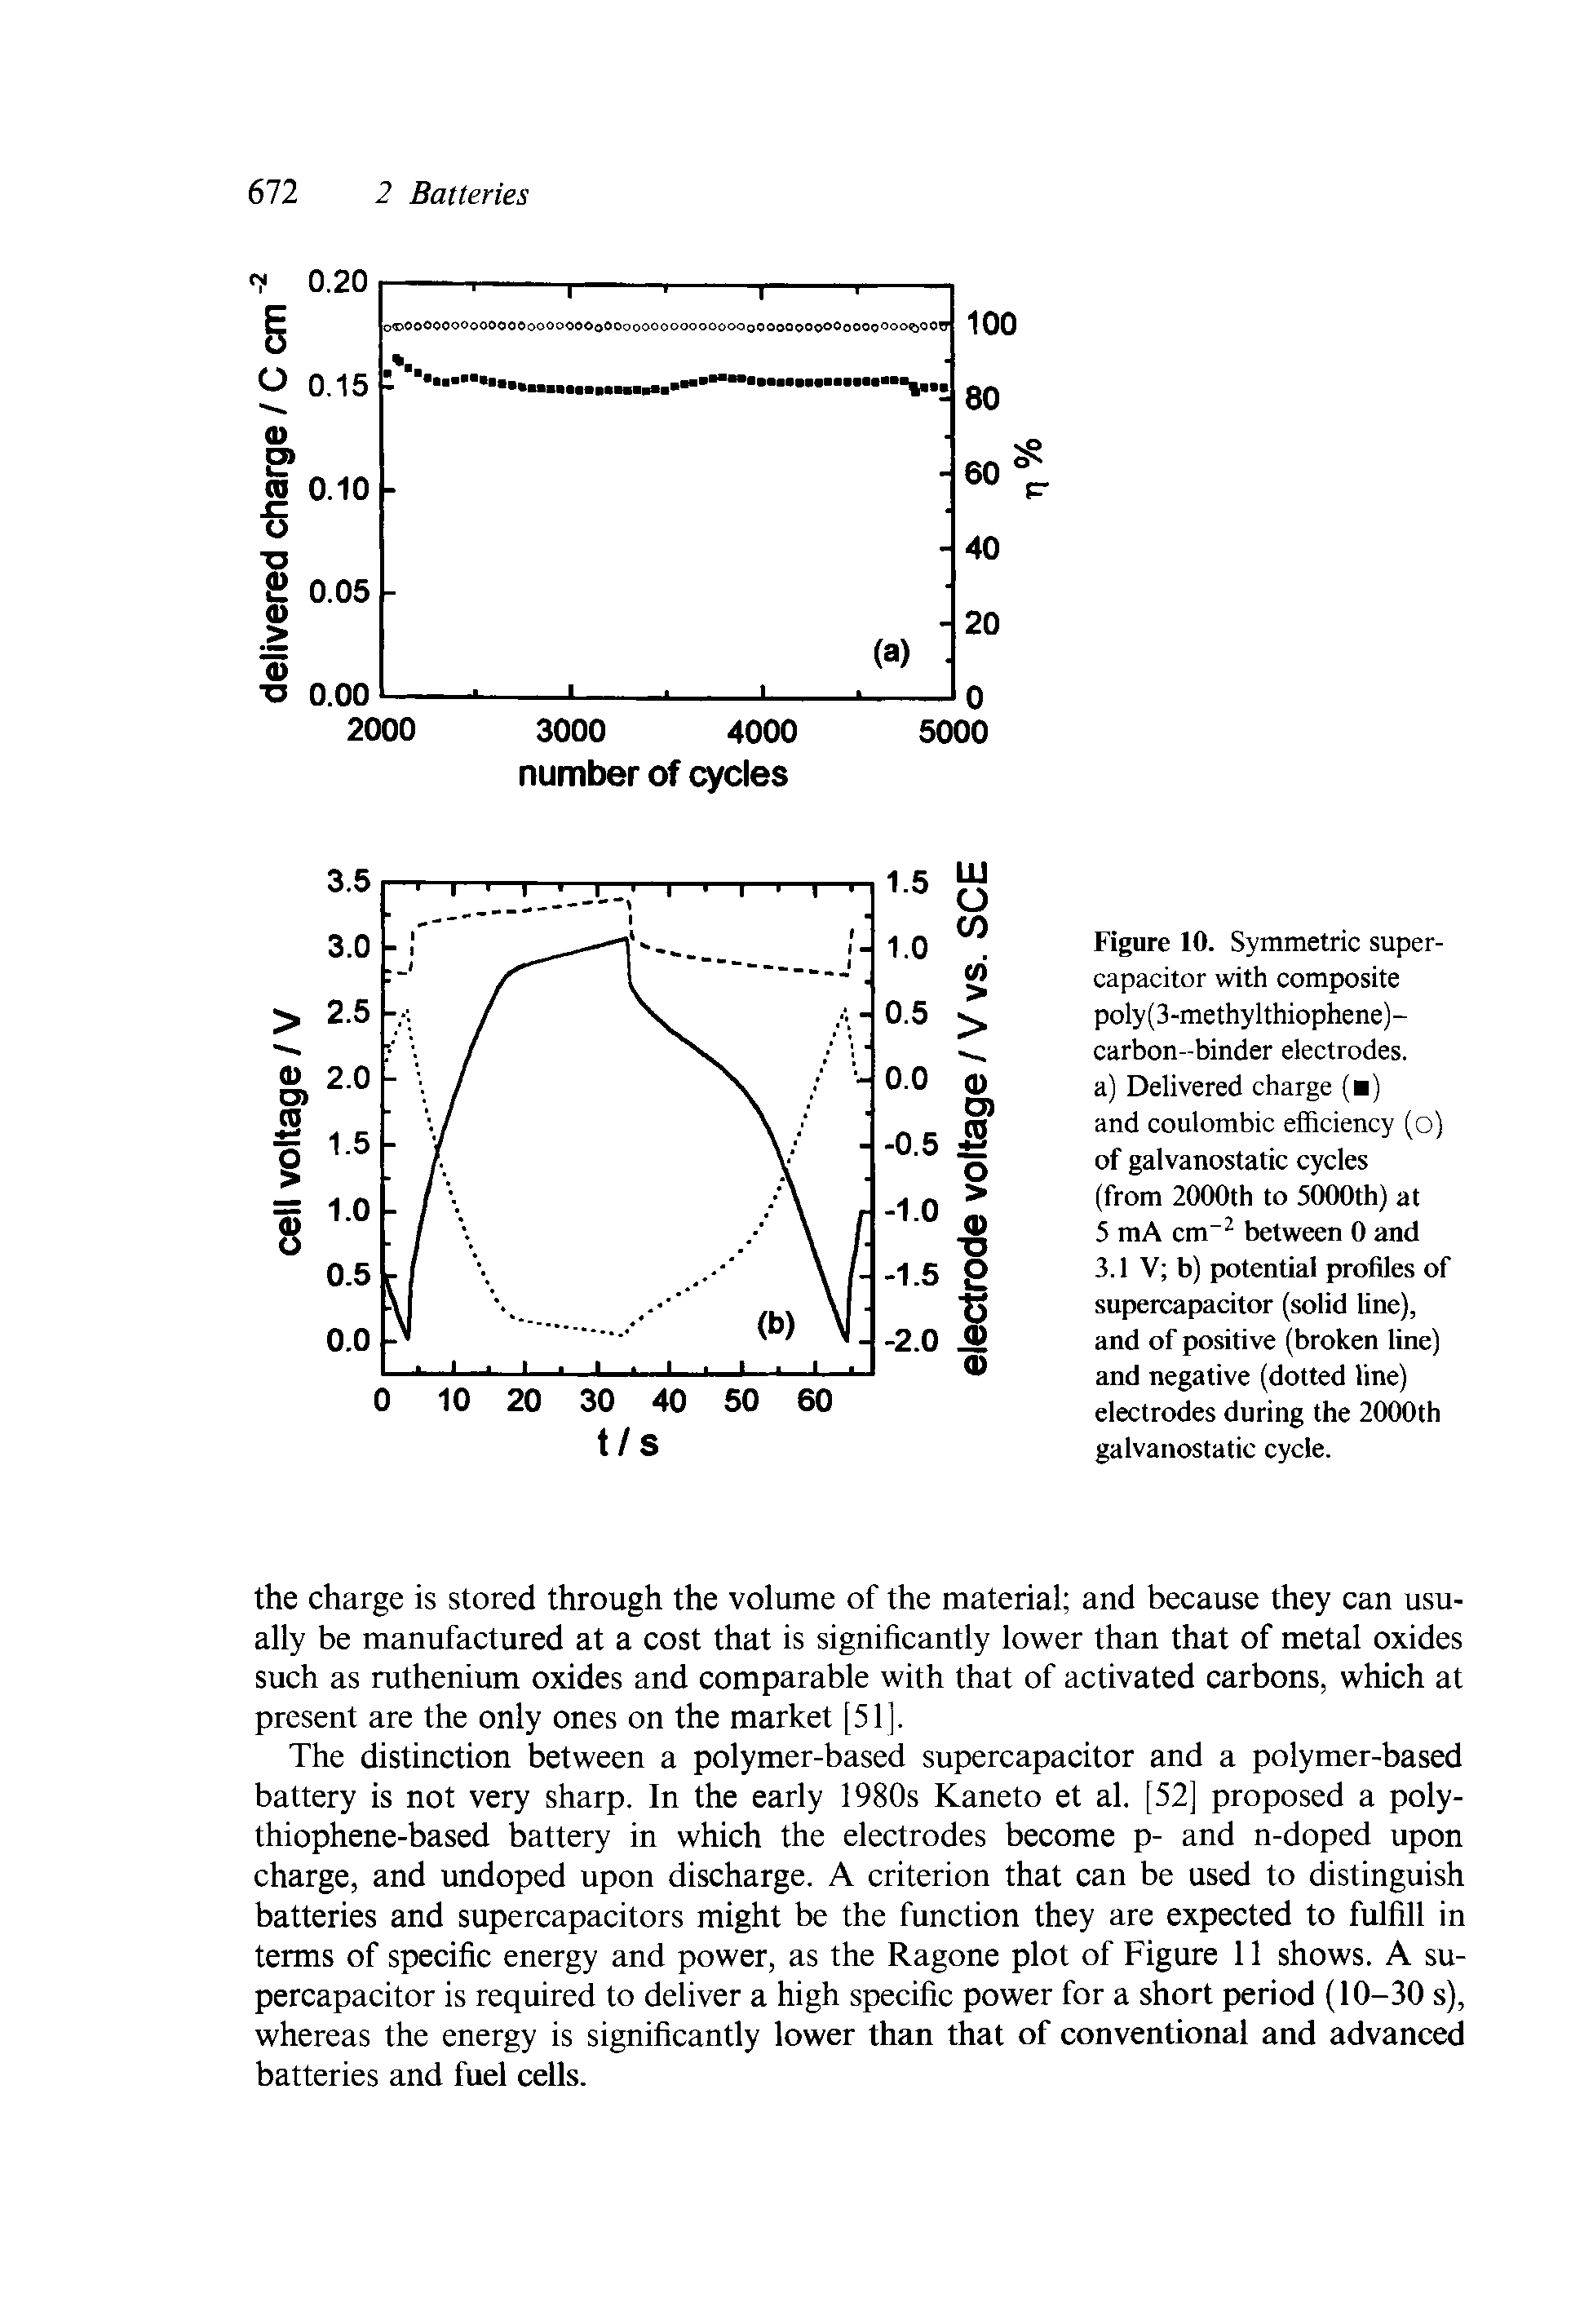 Figure 10. Symmetric supercapacitor with composite poly(3-methylthiophene)-carbon-binder electrodes, a) Delivered charge ( ) and coulombic efficiency (o) of galvanostatic cycles (from 2000th to 5000th) at 5 mA cm between 0 and 3.1 V b) potential profiles of supercapacitor (solid line), and of positive (broken line) and negative (dotted line) electrodes during the 2000th galvanostatic cycle.